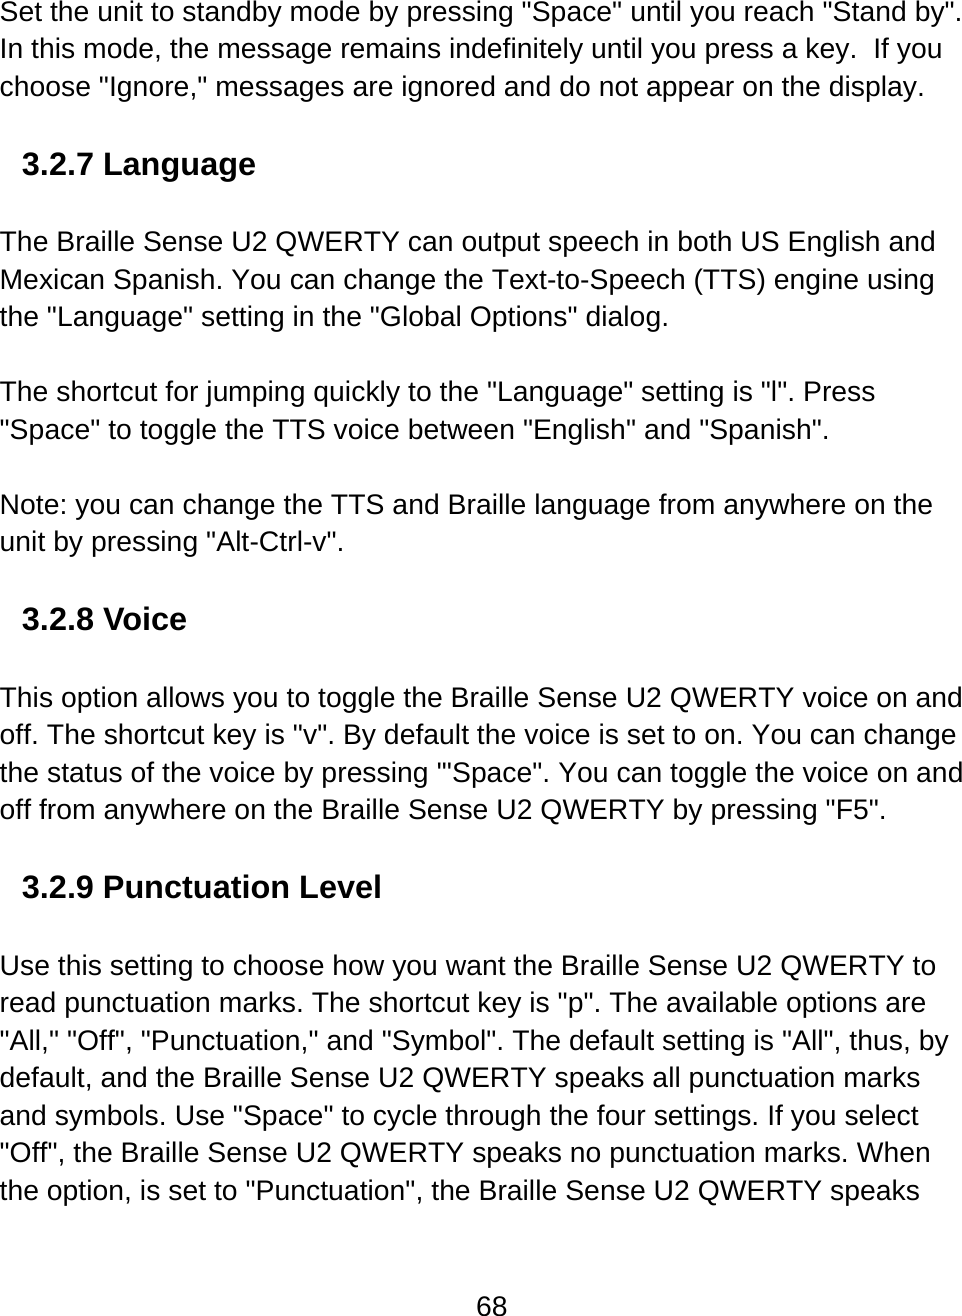 68  Set the unit to standby mode by pressing &quot;Space&quot; until you reach &quot;Stand by&quot;. In this mode, the message remains indefinitely until you press a key.  If you choose &quot;Ignore,&quot; messages are ignored and do not appear on the display.   3.2.7 Language  The Braille Sense U2 QWERTY can output speech in both US English and Mexican Spanish. You can change the Text-to-Speech (TTS) engine using the &quot;Language&quot; setting in the &quot;Global Options&quot; dialog.   The shortcut for jumping quickly to the &quot;Language&quot; setting is &quot;l&quot;. Press &quot;Space&quot; to toggle the TTS voice between &quot;English&quot; and &quot;Spanish&quot;.   Note: you can change the TTS and Braille language from anywhere on the unit by pressing &quot;Alt-Ctrl-v&quot;.  3.2.8 Voice  This option allows you to toggle the Braille Sense U2 QWERTY voice on and off. The shortcut key is &quot;v&quot;. By default the voice is set to on. You can change the status of the voice by pressing &apos;&quot;Space&quot;. You can toggle the voice on and off from anywhere on the Braille Sense U2 QWERTY by pressing &quot;F5&quot;.   3.2.9 Punctuation Level  Use this setting to choose how you want the Braille Sense U2 QWERTY to read punctuation marks. The shortcut key is &quot;p&quot;. The available options are &quot;All,&quot; &quot;Off&quot;, &quot;Punctuation,&quot; and &quot;Symbol&quot;. The default setting is &quot;All&quot;, thus, by default, and the Braille Sense U2 QWERTY speaks all punctuation marks and symbols. Use &quot;Space&quot; to cycle through the four settings. If you select &quot;Off&quot;, the Braille Sense U2 QWERTY speaks no punctuation marks. When the option, is set to &quot;Punctuation&quot;, the Braille Sense U2 QWERTY speaks 